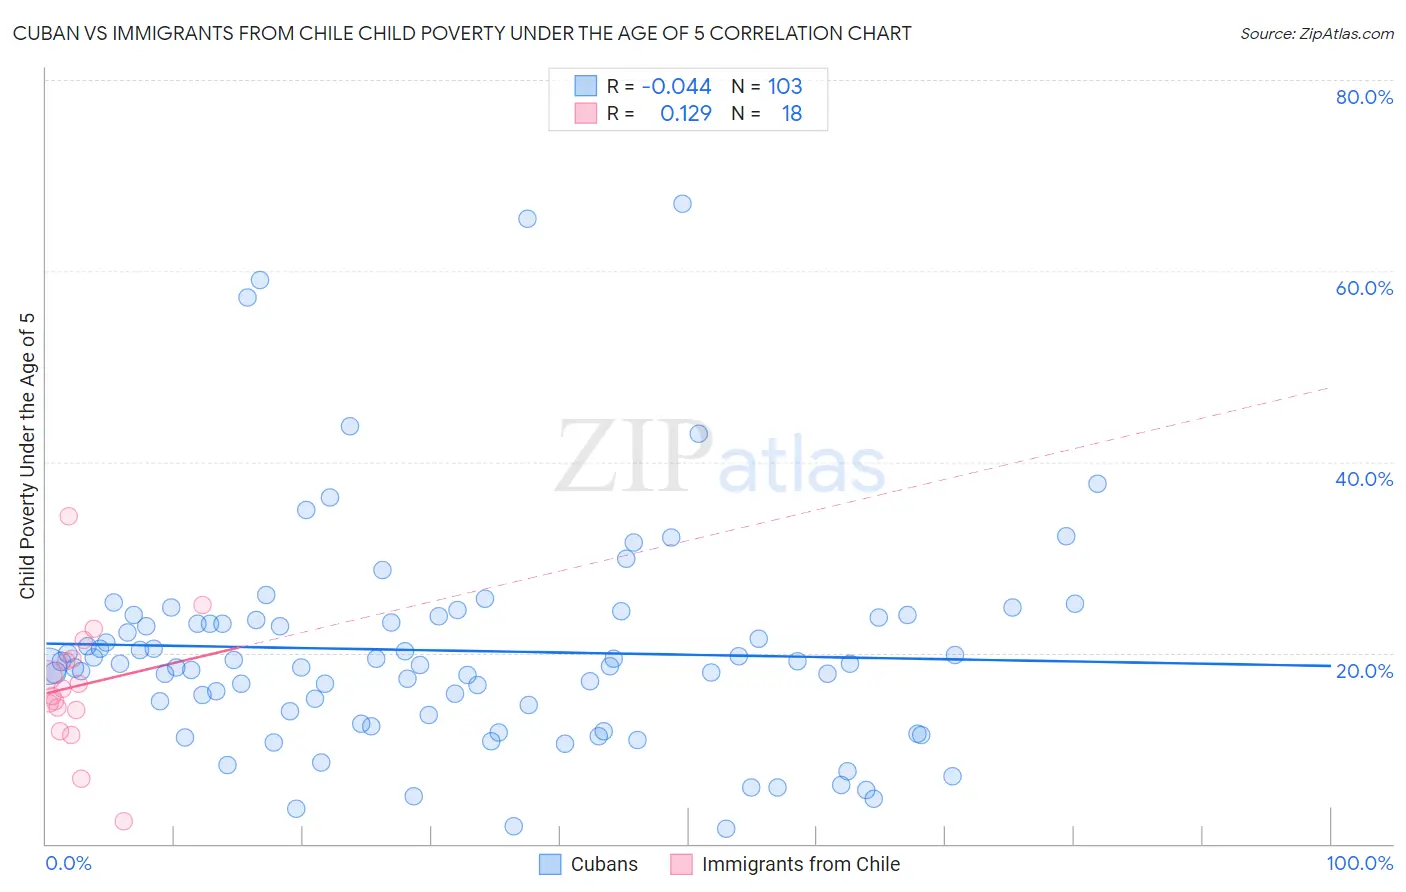 Cuban vs Immigrants from Chile Child Poverty Under the Age of 5